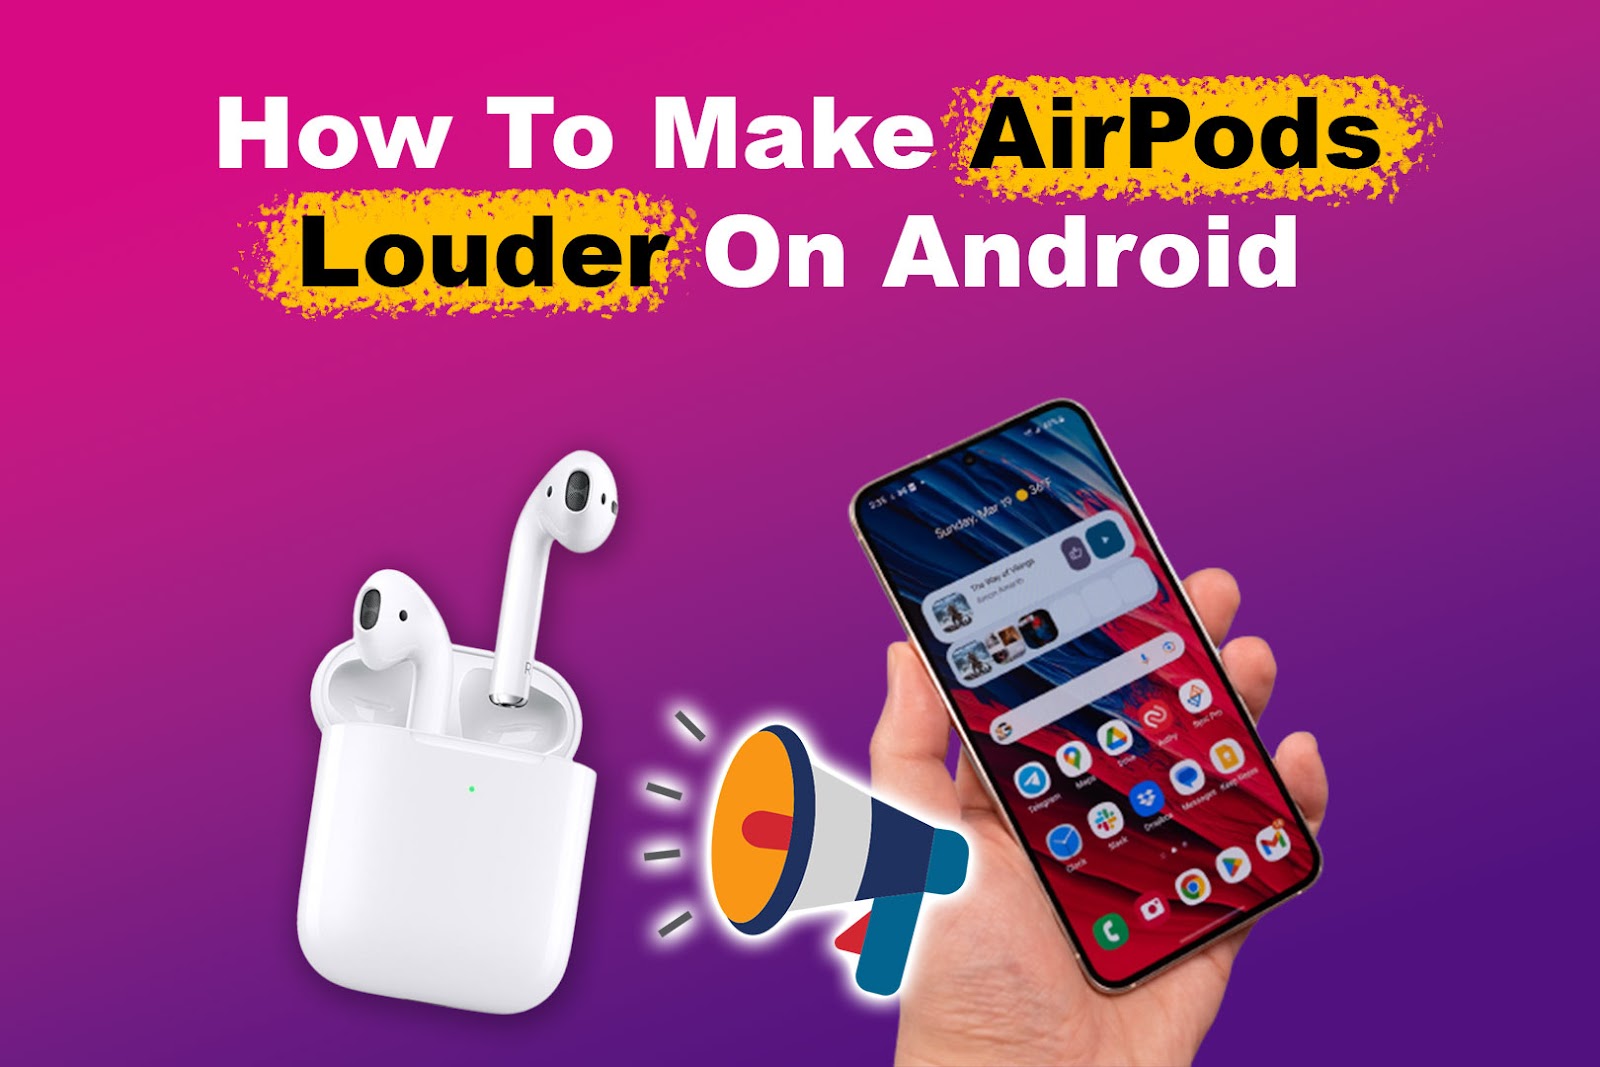 How To Make AirPods Louder On Android